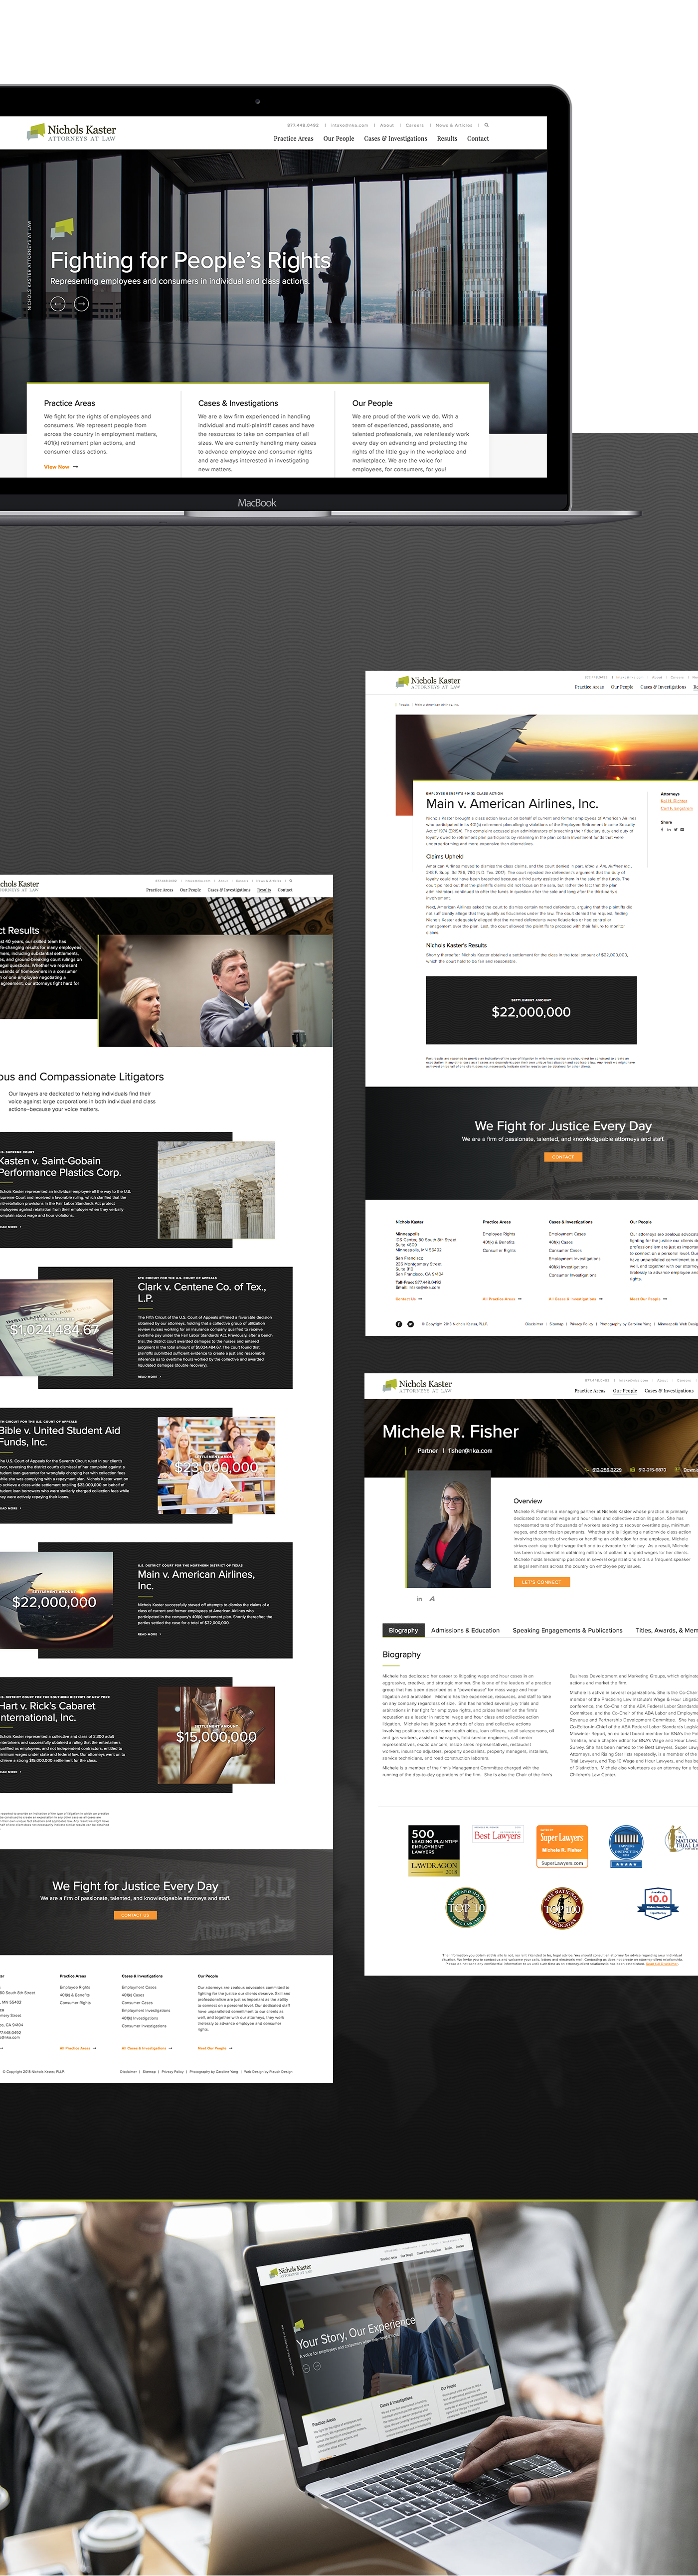 Web design UI ux law firm lawyer Website redesign attorney graphic design 